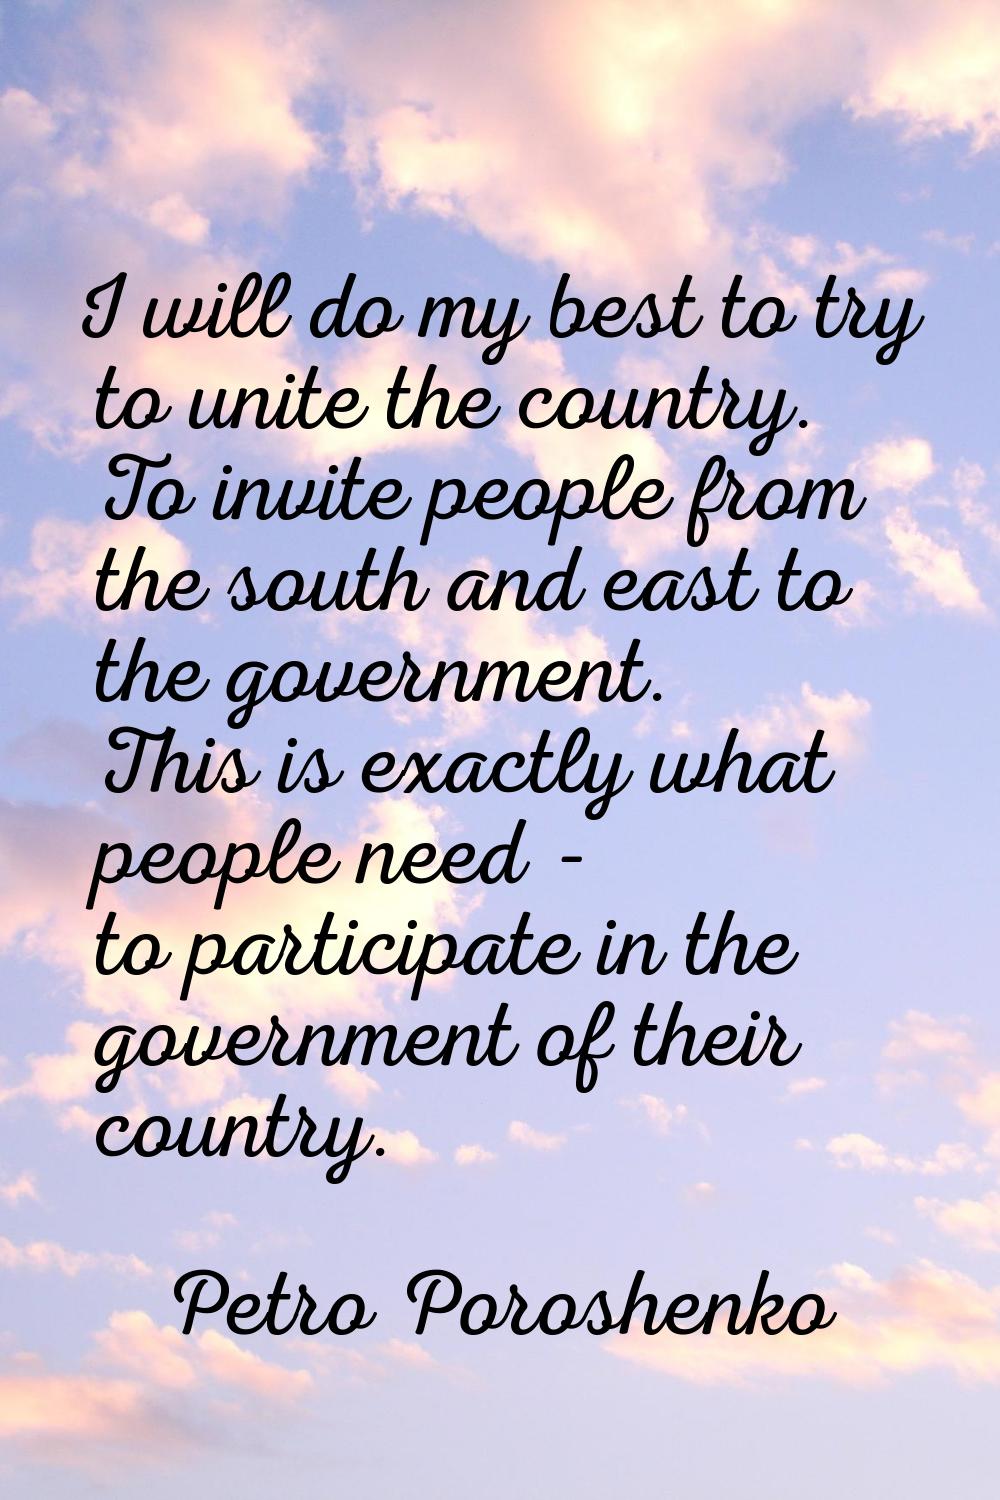 I will do my best to try to unite the country. To invite people from the south and east to the gove